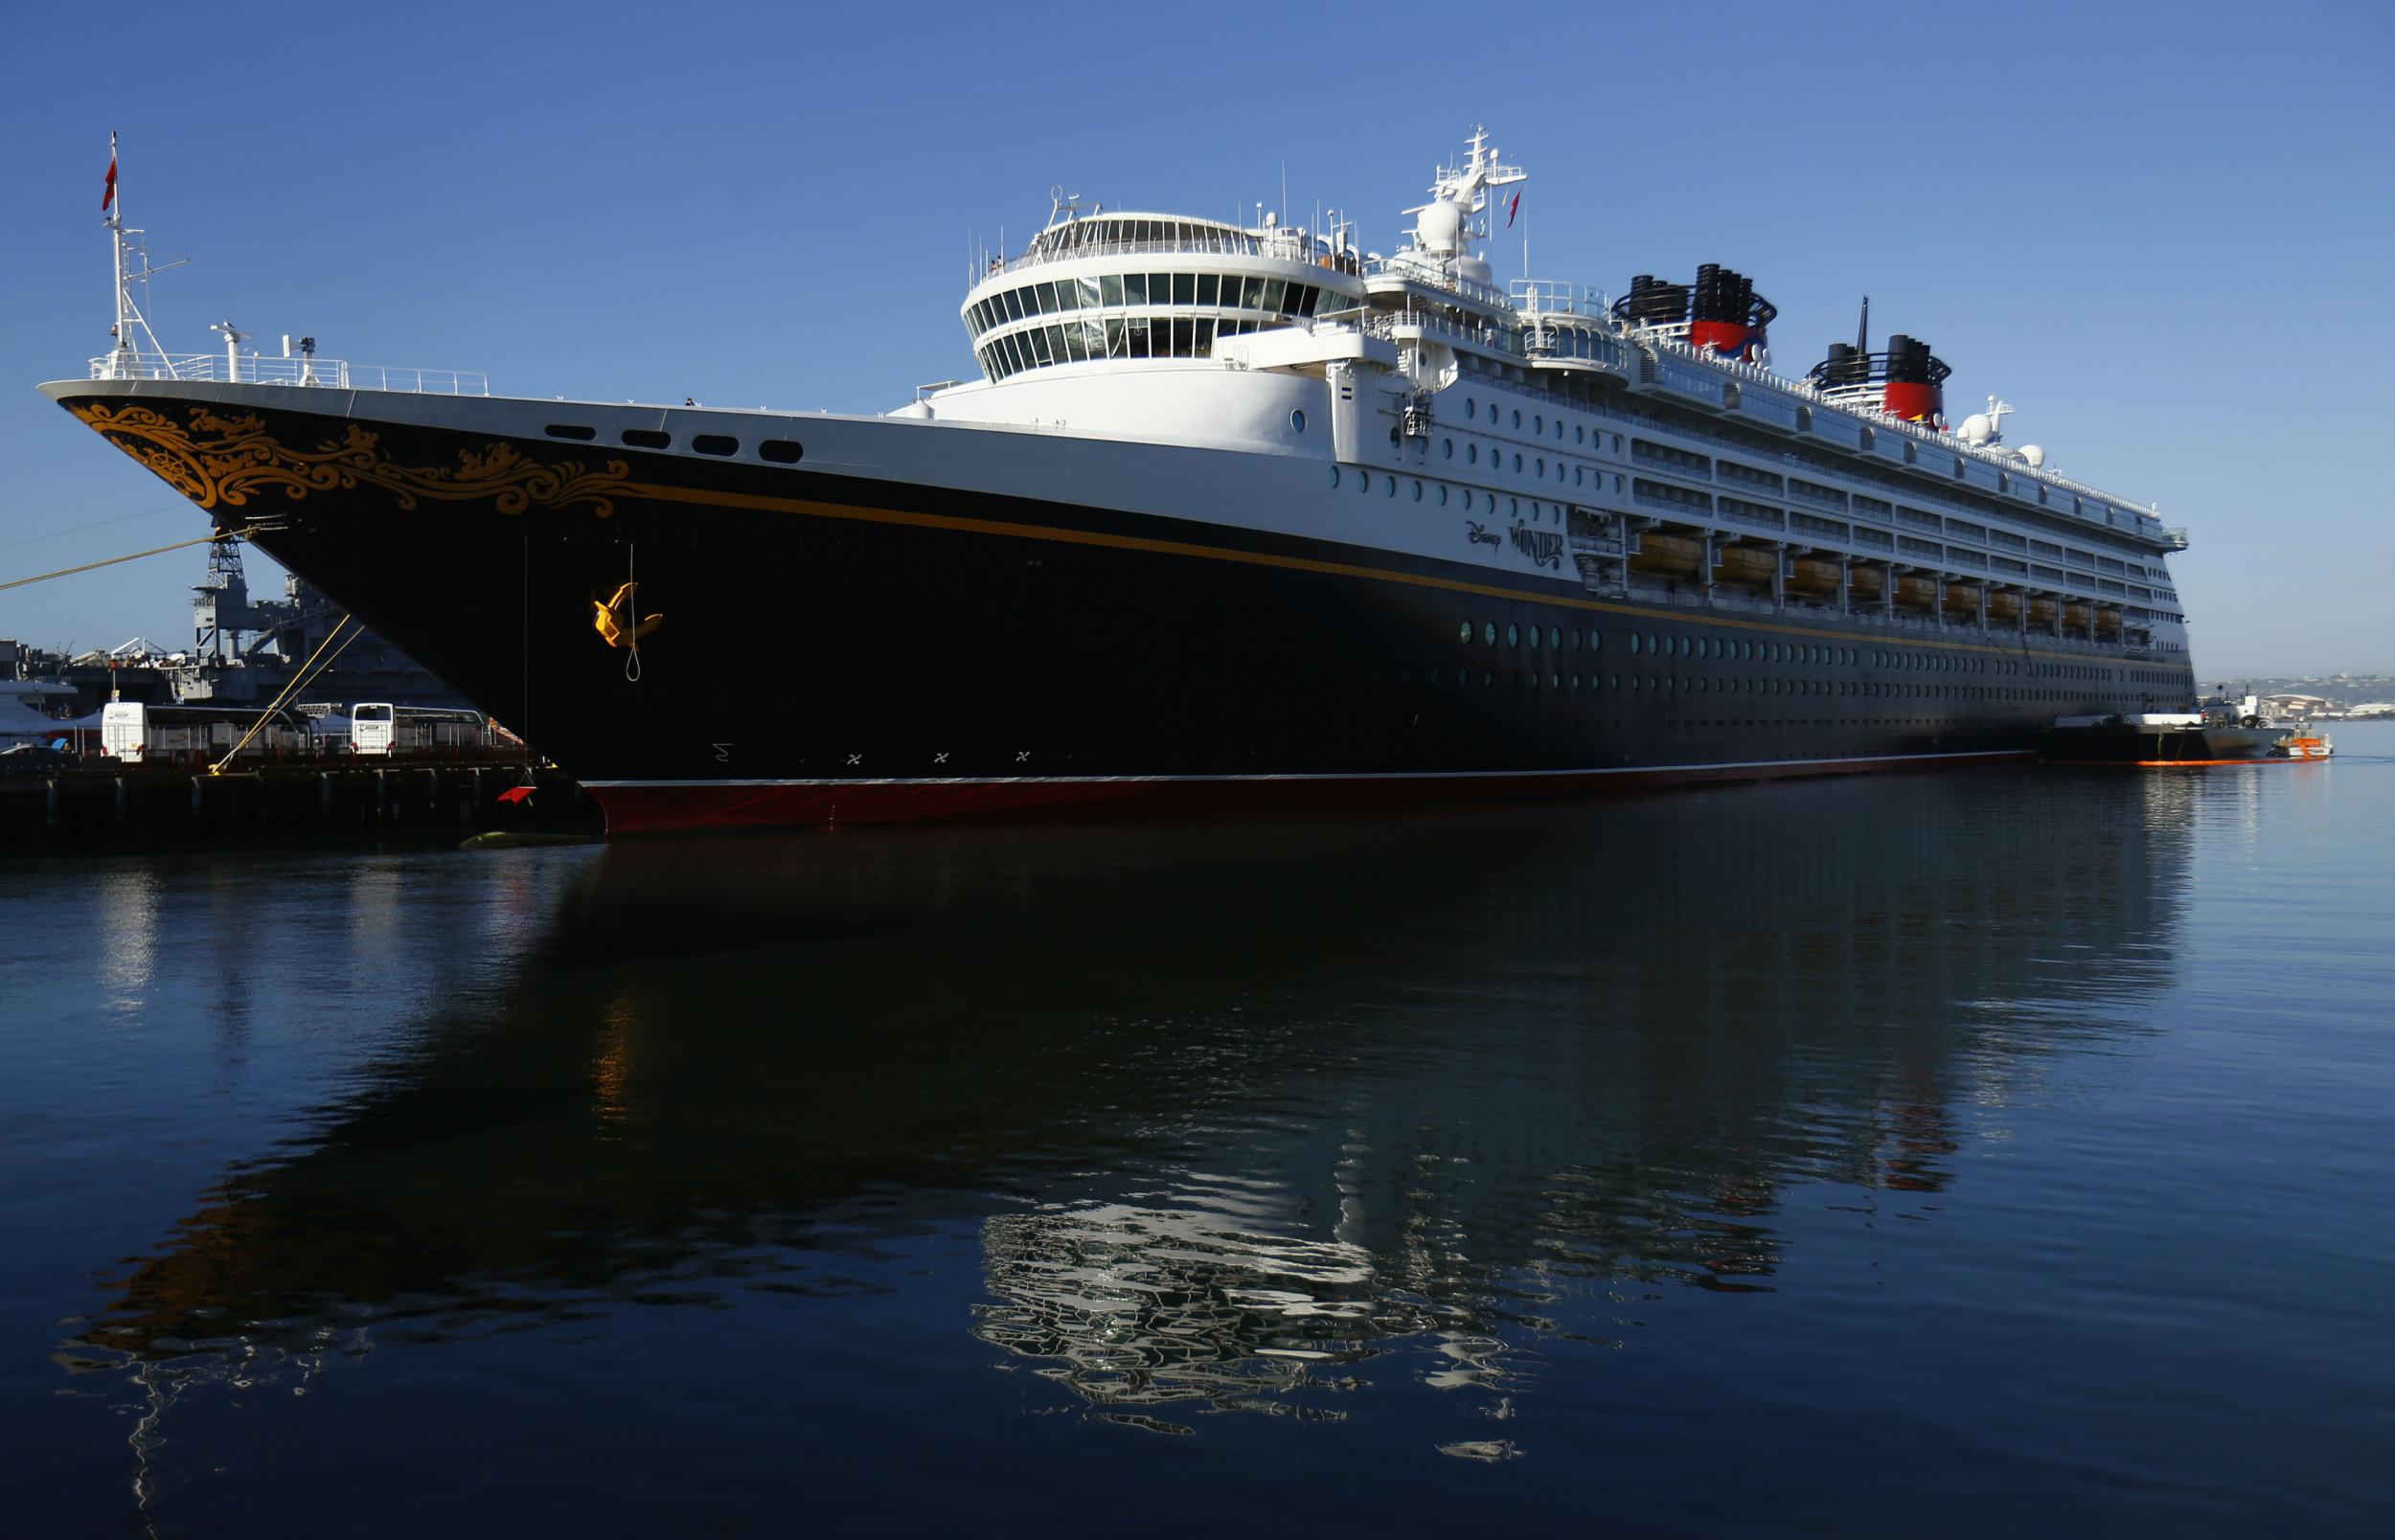 The Disney Wonder diverted to help the vessel